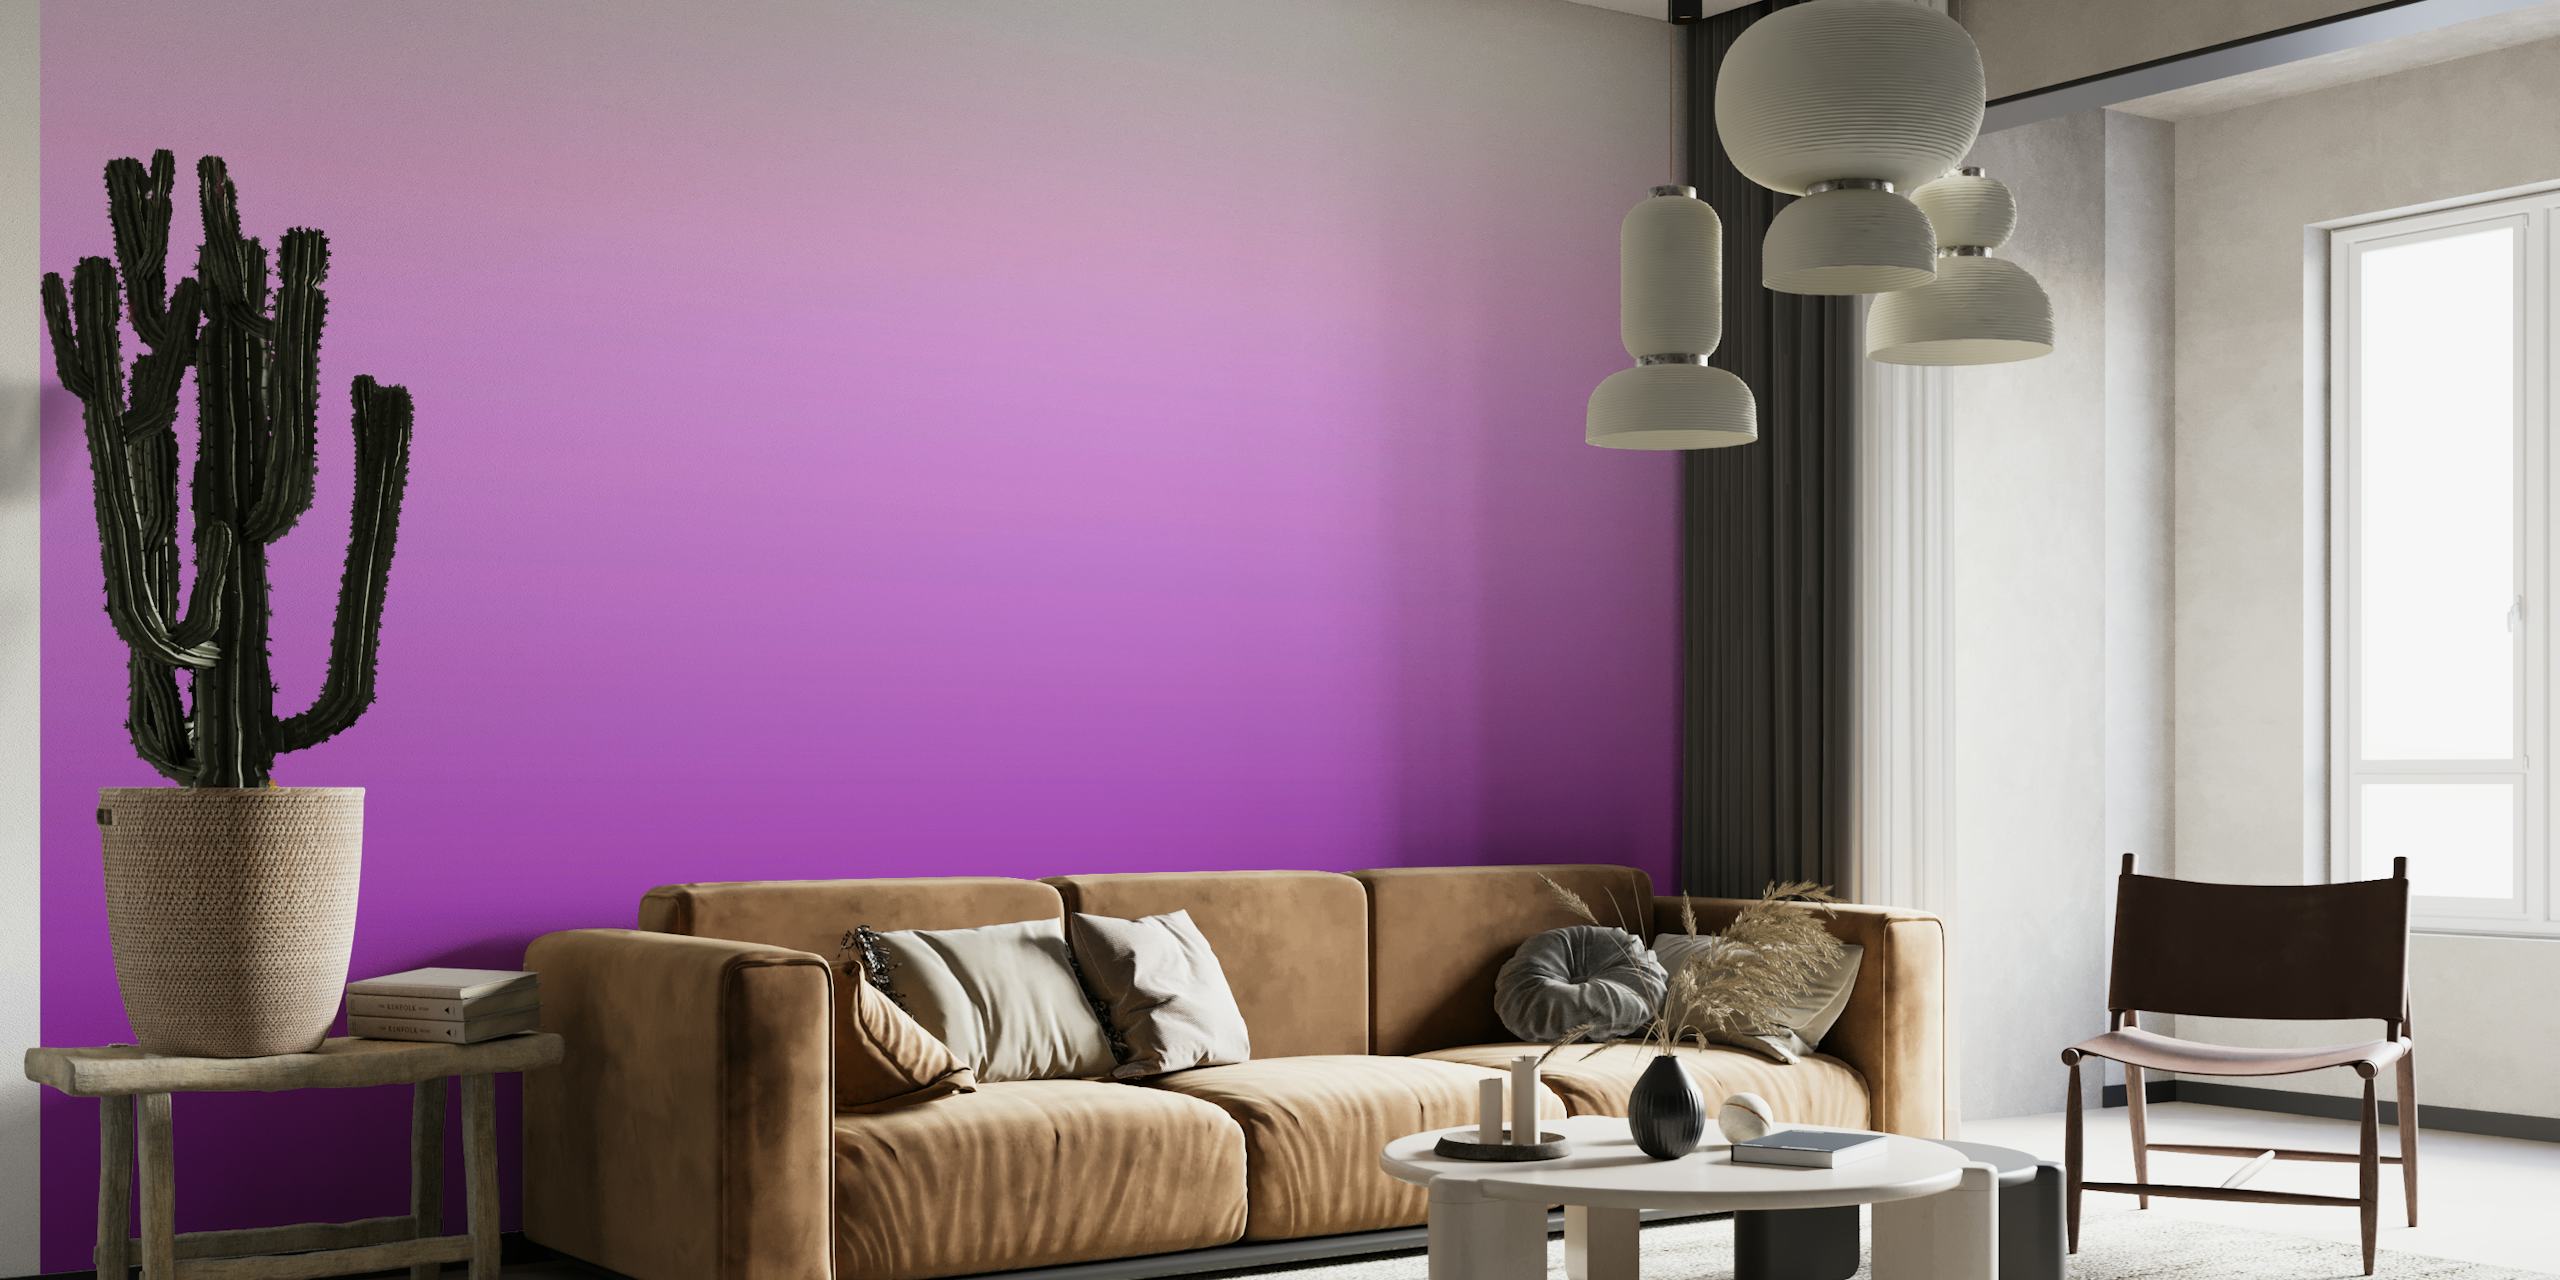 Patriarch Purple Gradient Wall Mural with a smooth transition from deep purple to light pink